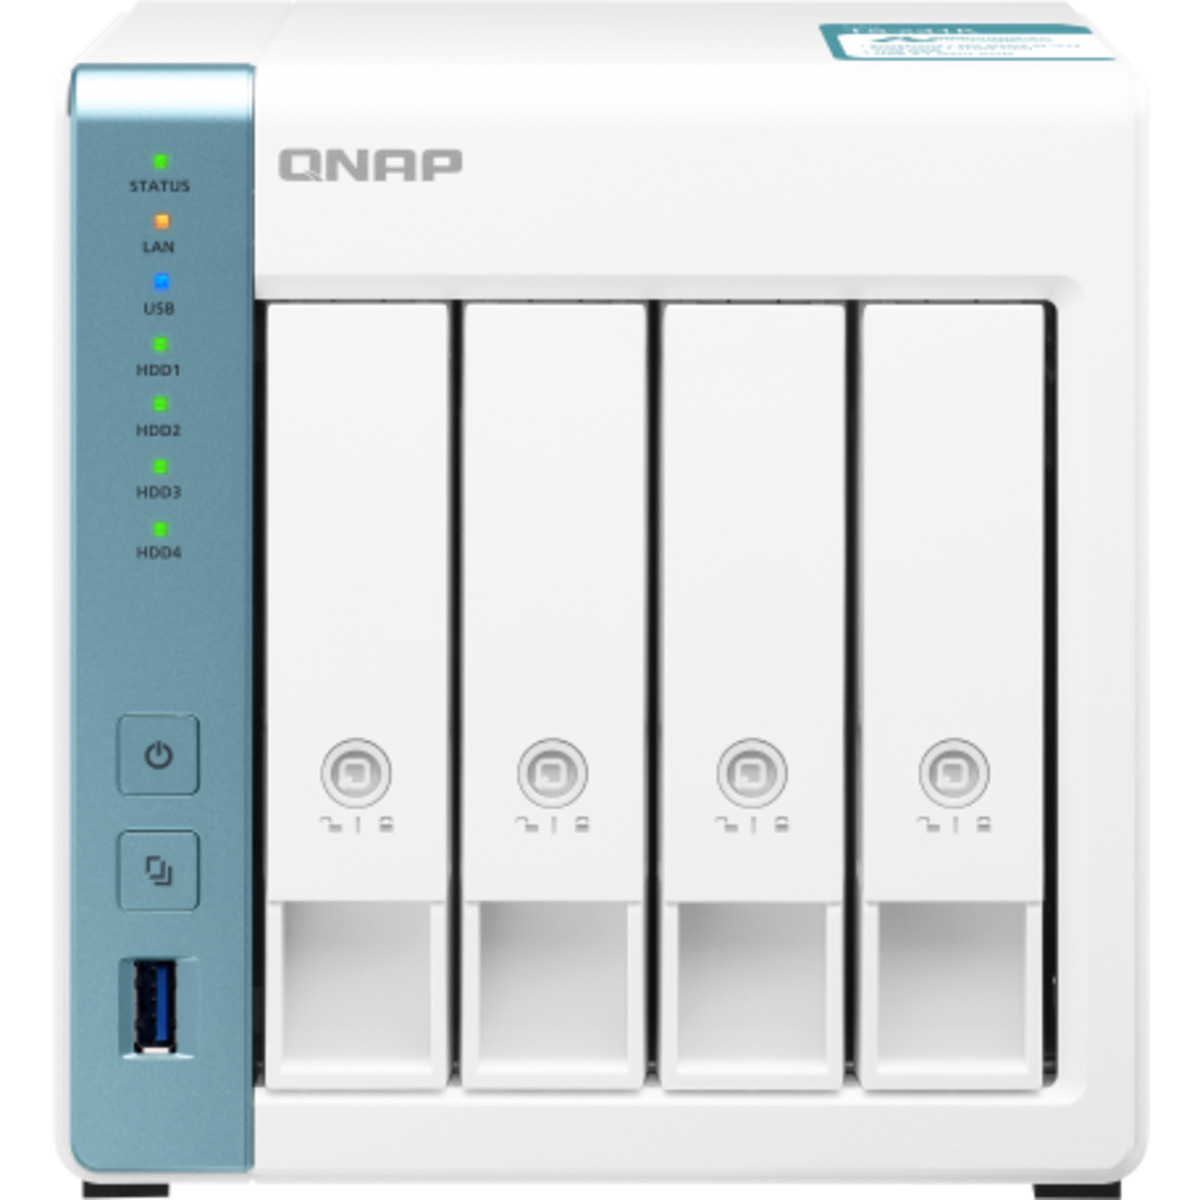 QNAP TS-431K 24tb 4-Bay Desktop Personal / Basic Home / Small Office NAS - Network Attached Storage Device 3x8tb Western Digital Ultrastar DC HC320 HUS728T8TALE6L4 3.5 7200rpm SATA 6Gb/s HDD ENTERPRISE Class Drives Installed - Burn-In Tested TS-431K